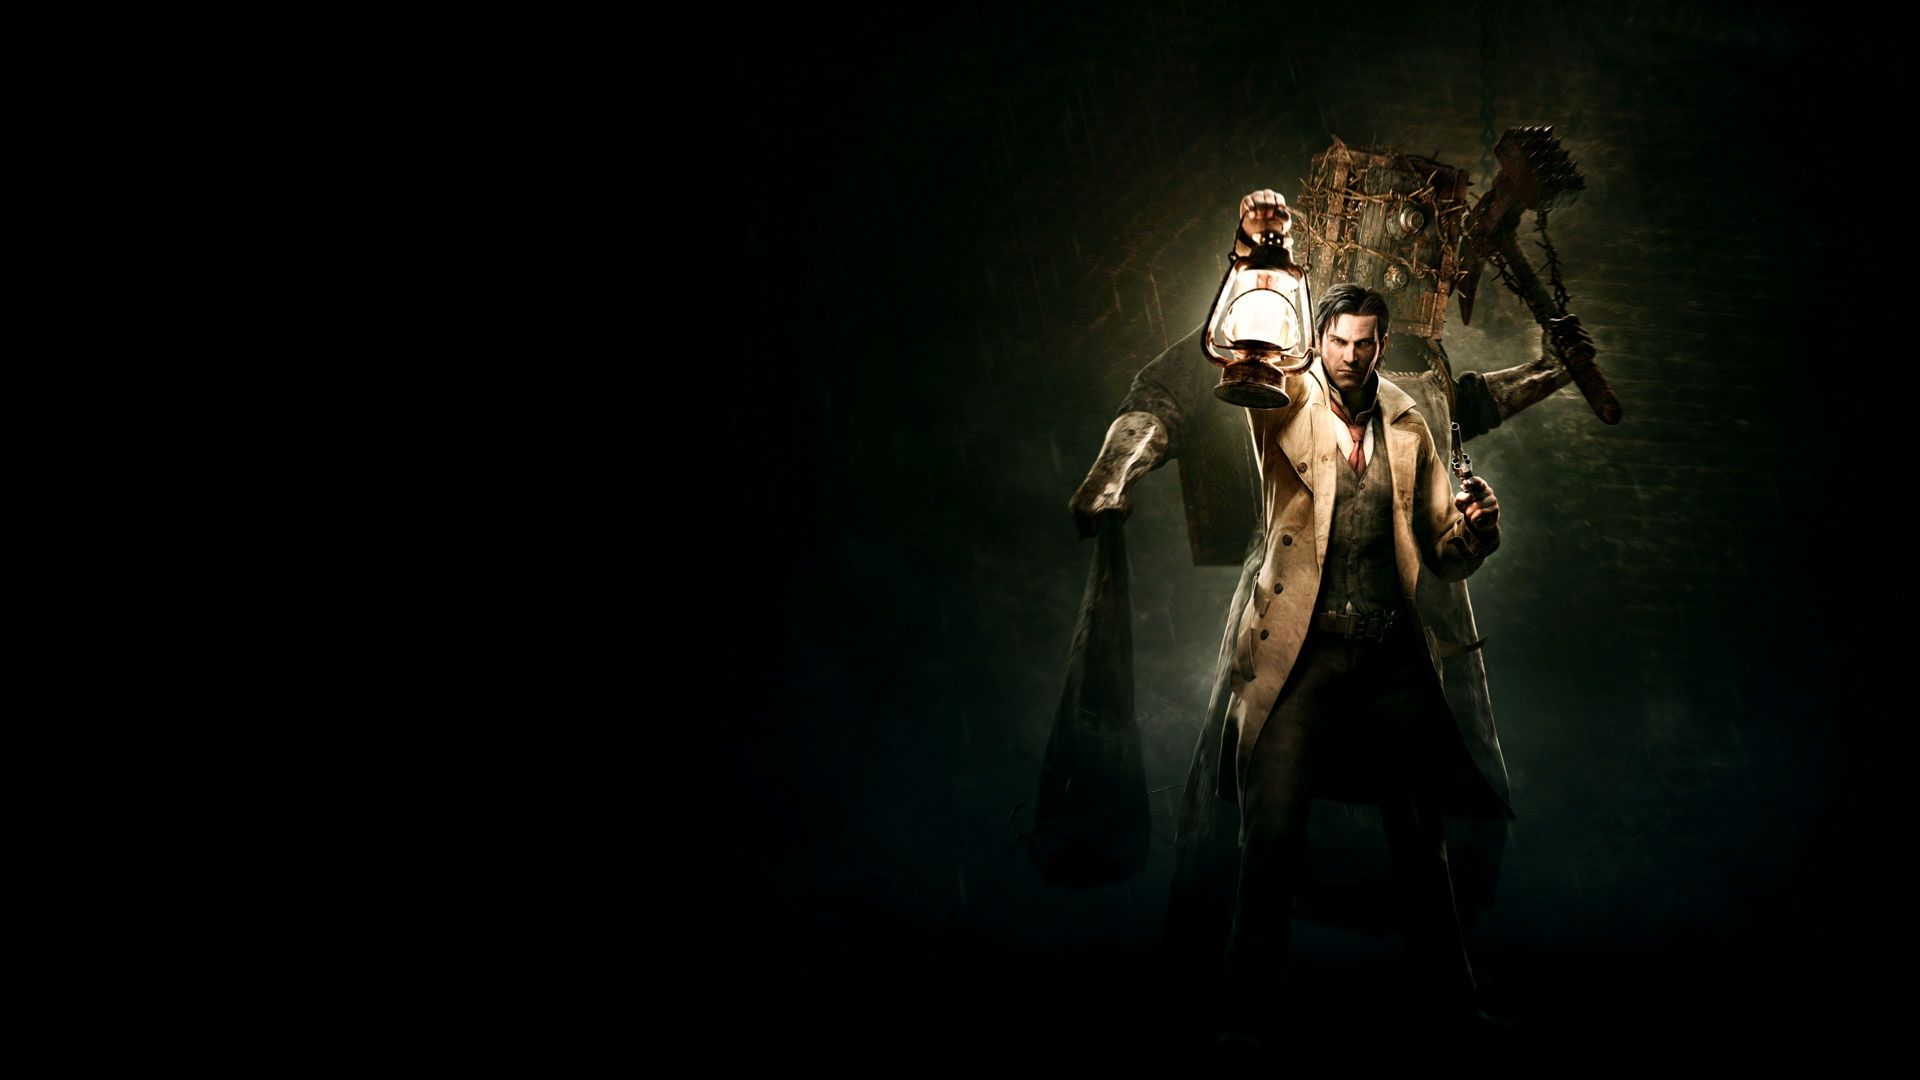 Download 1920x1080 The Evil Within, Horror Games, Lantern